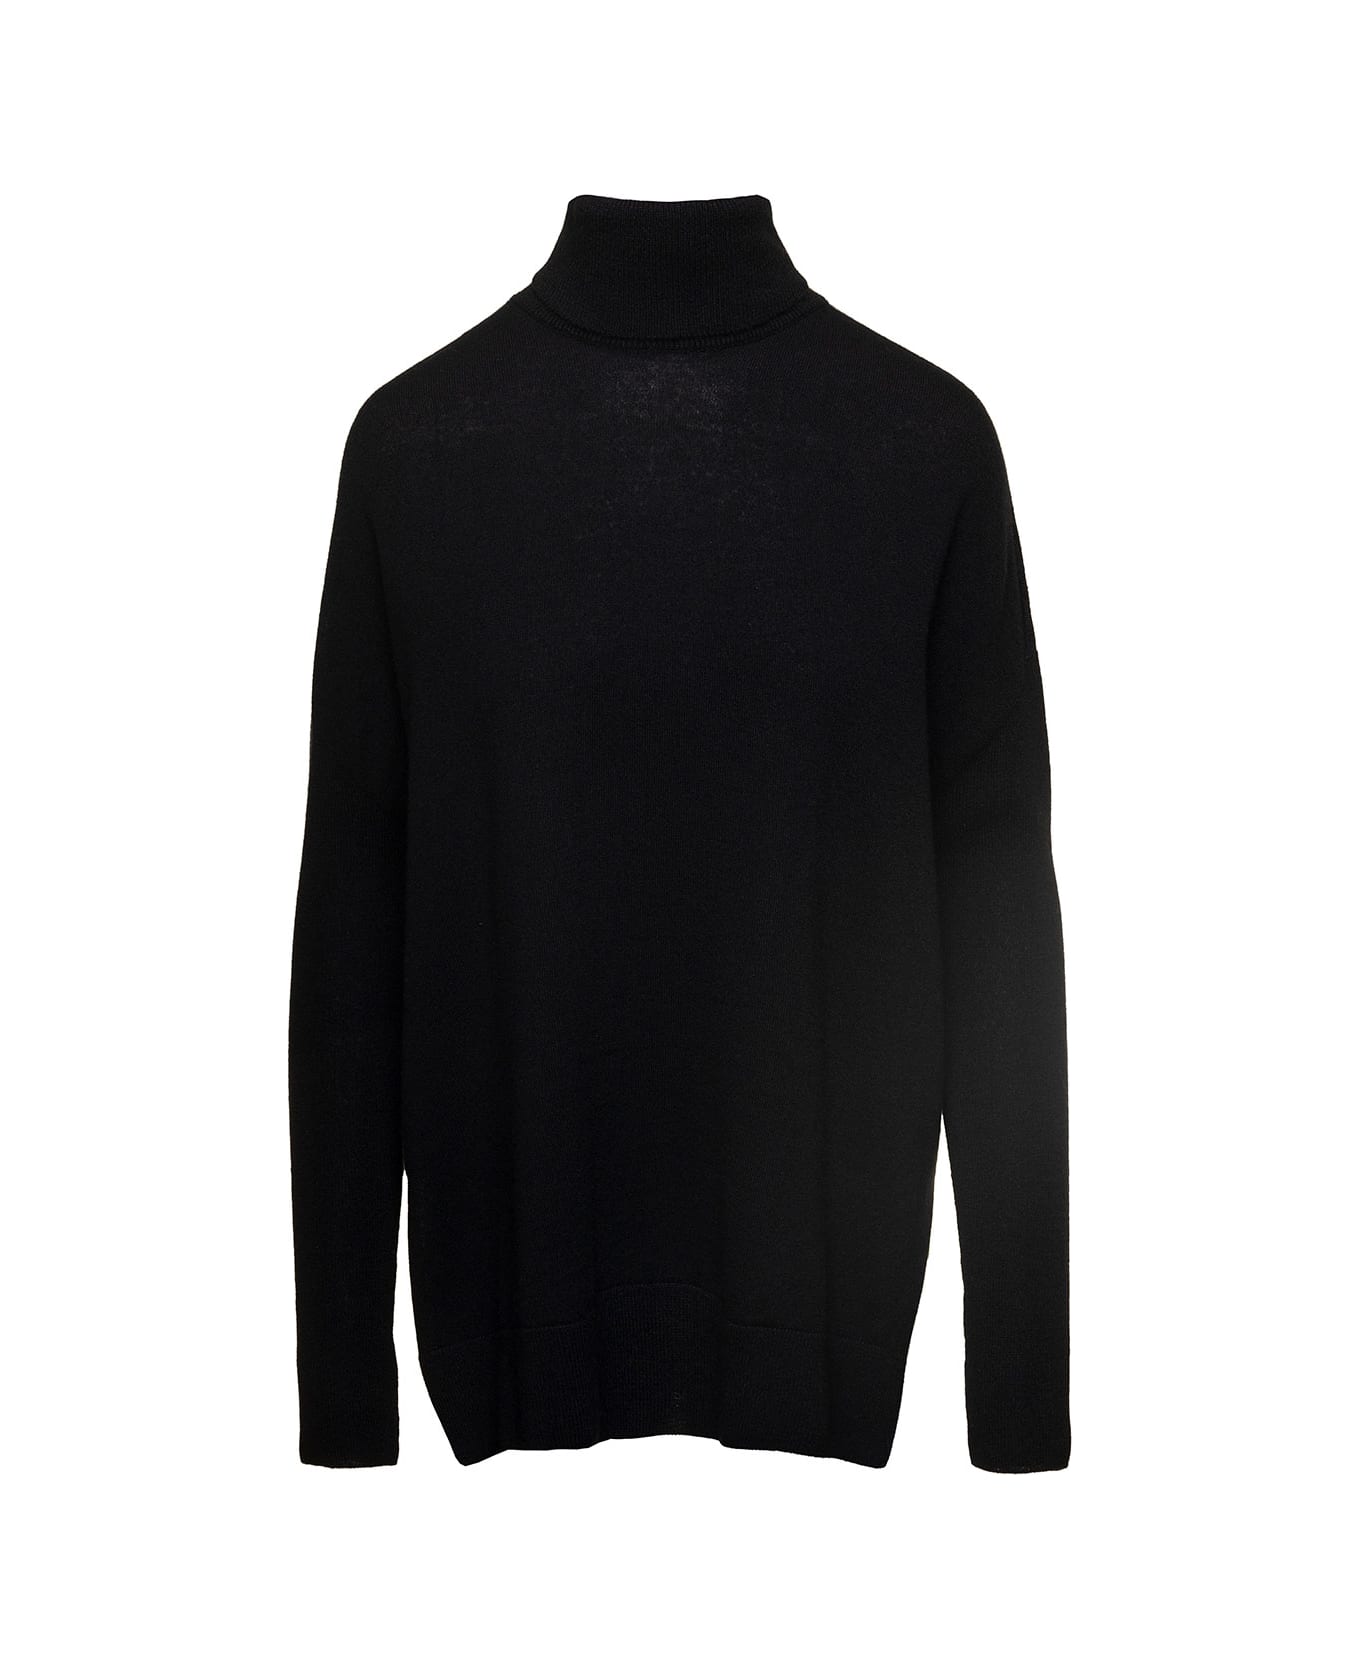 Antonelli Black Sweater With Mock Neck In Wool And Cashmere Woman - Black